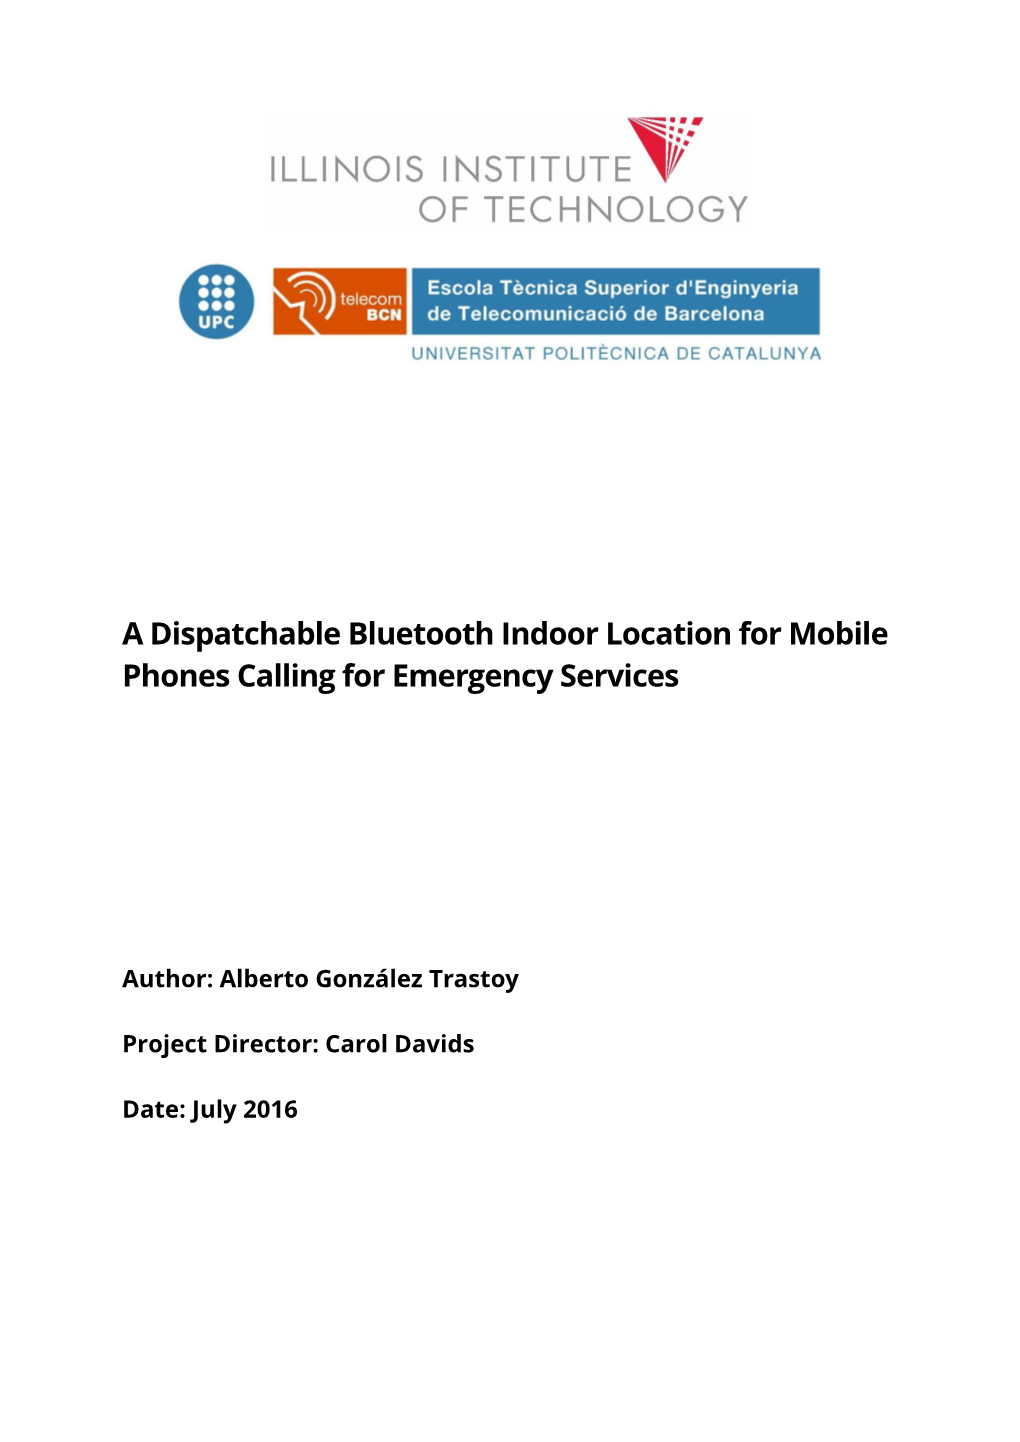 A Dispatchable Bluetooth Indoor Location for Mobile Phones Calling for Emergency Services